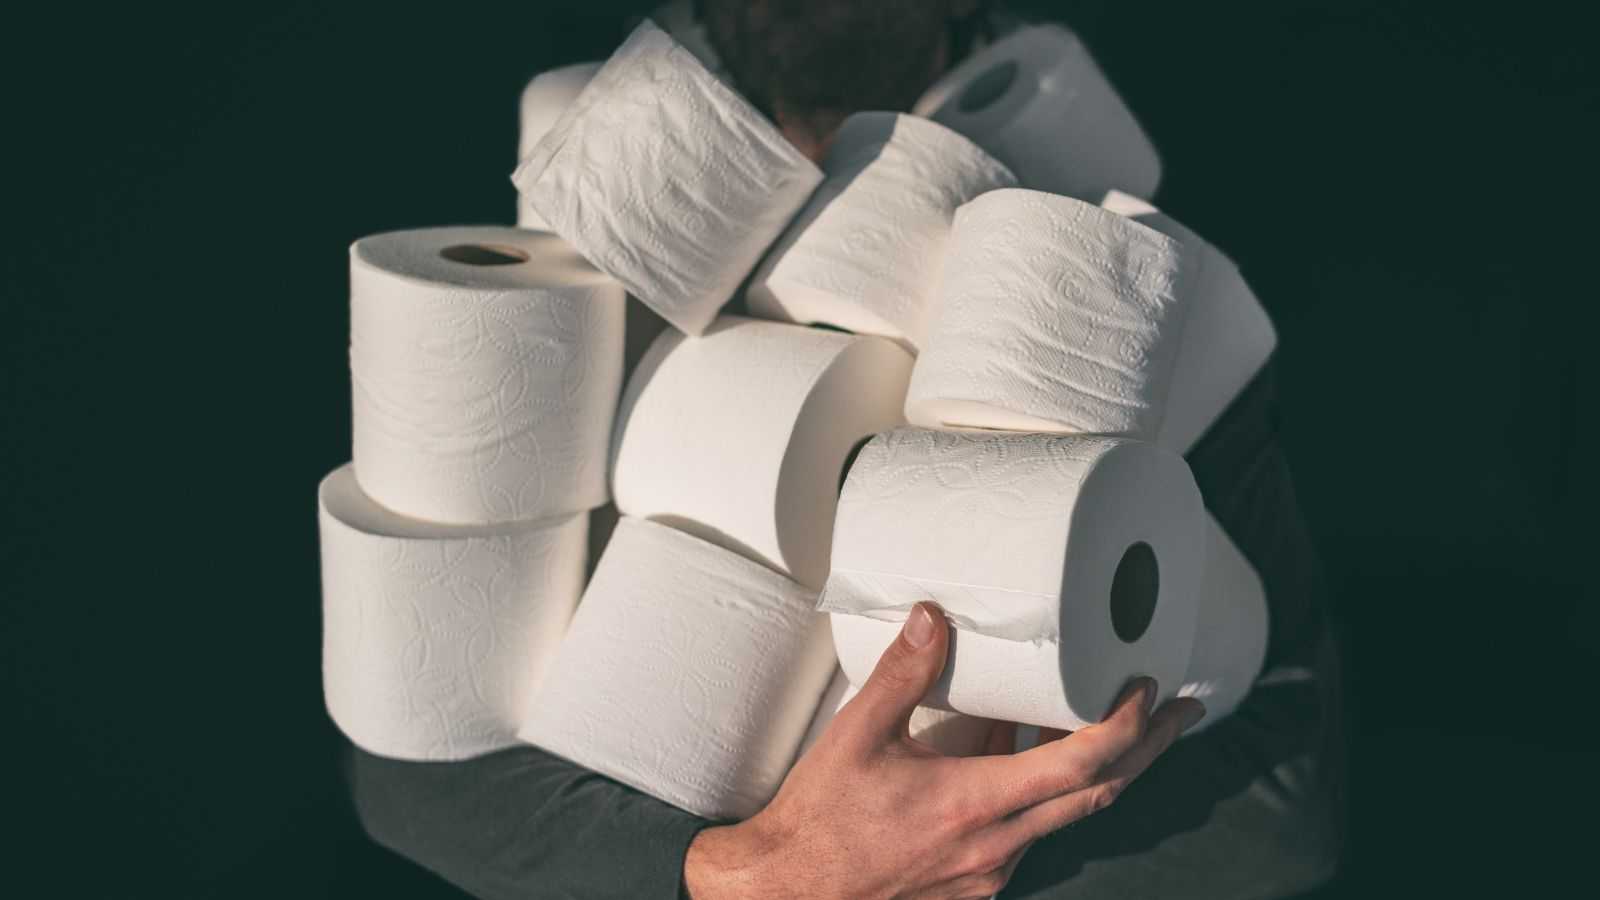 A person holding a pile of toilet paper